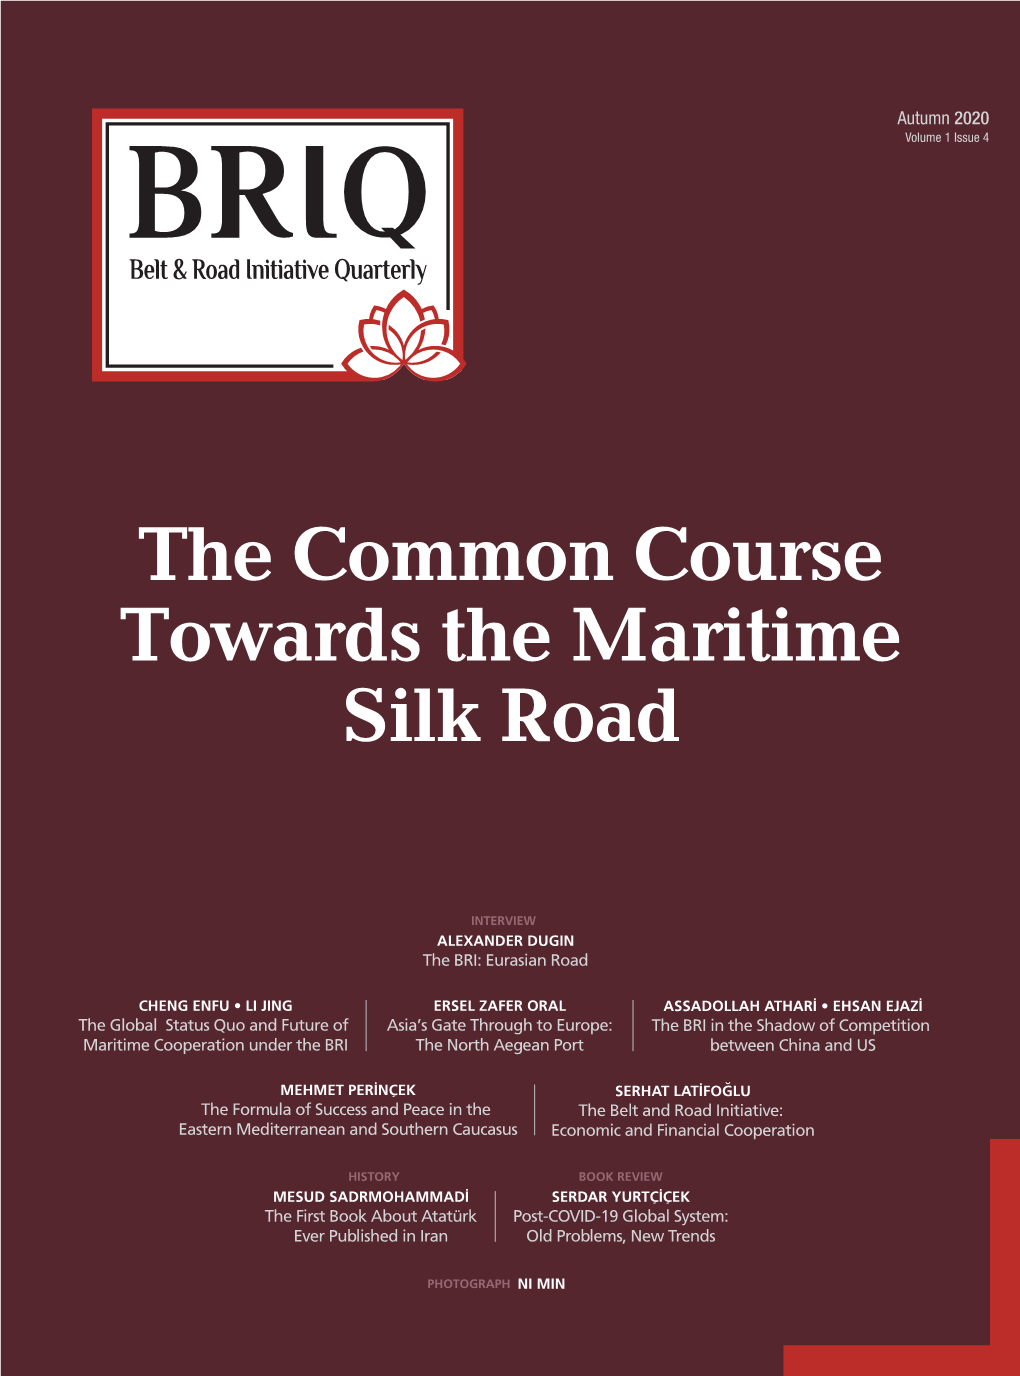 The Common Course Towards the Maritime Silk Road